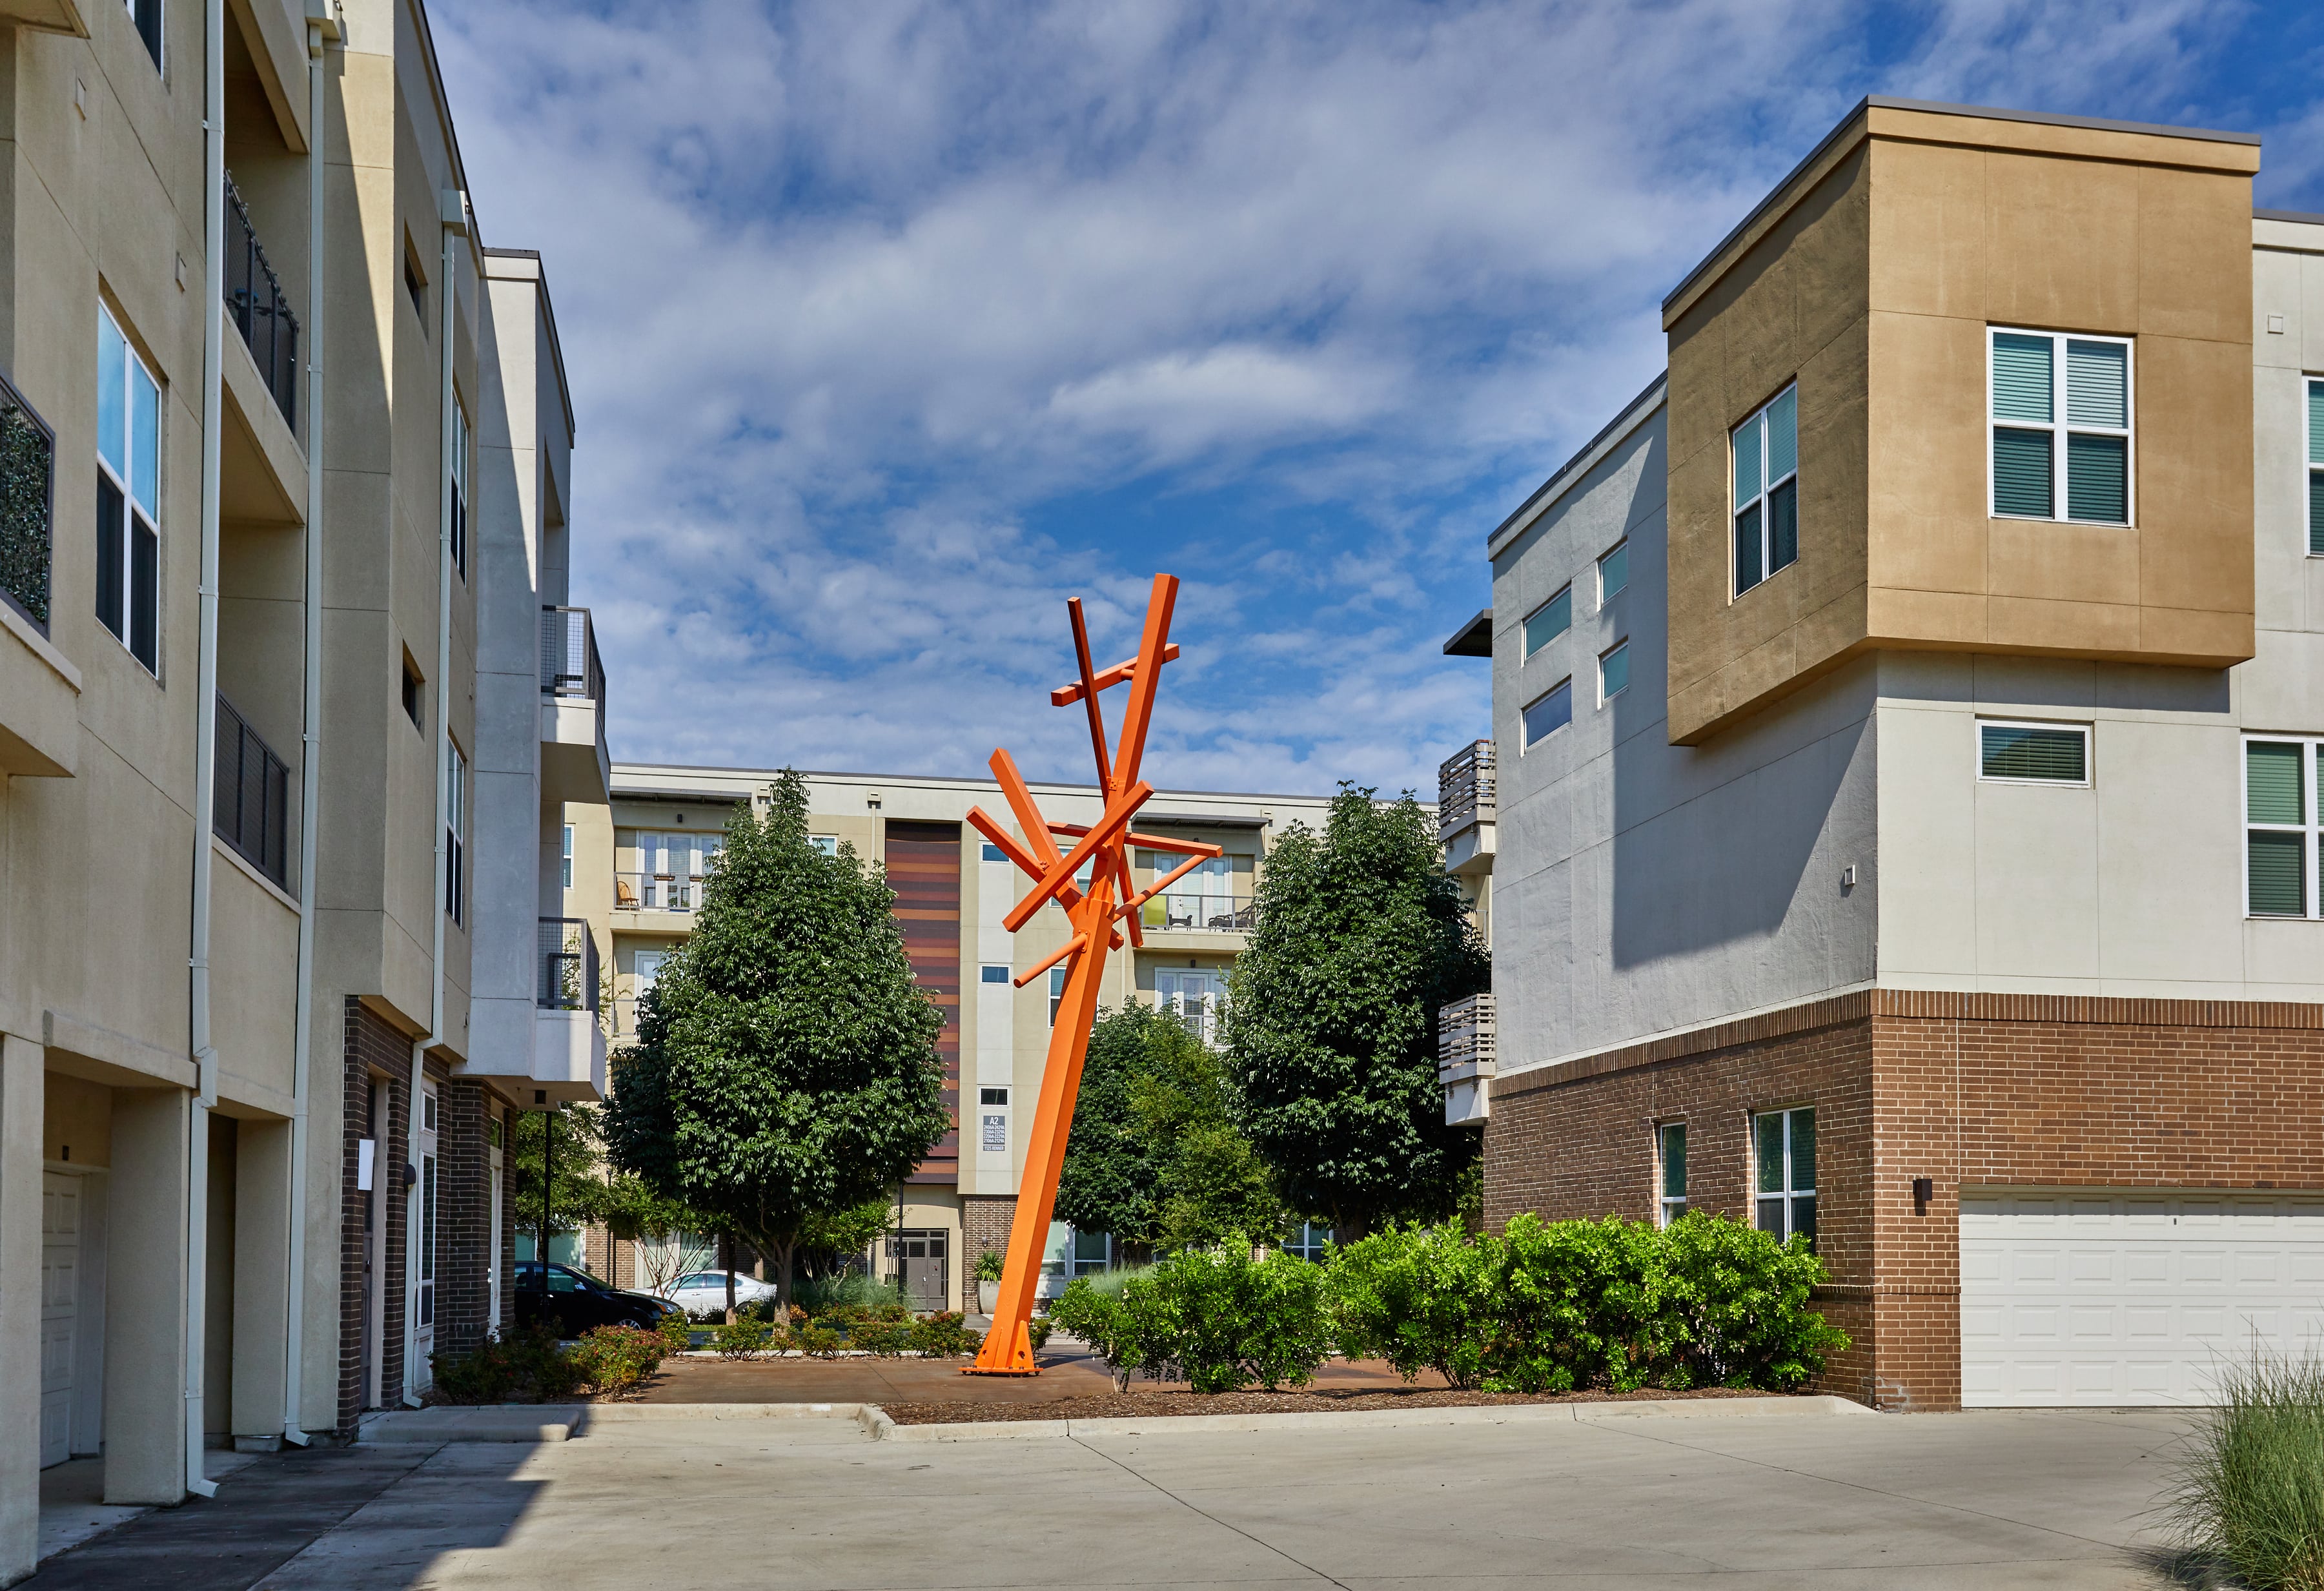 The standard at Cityline community exterior with a large orange sculpture